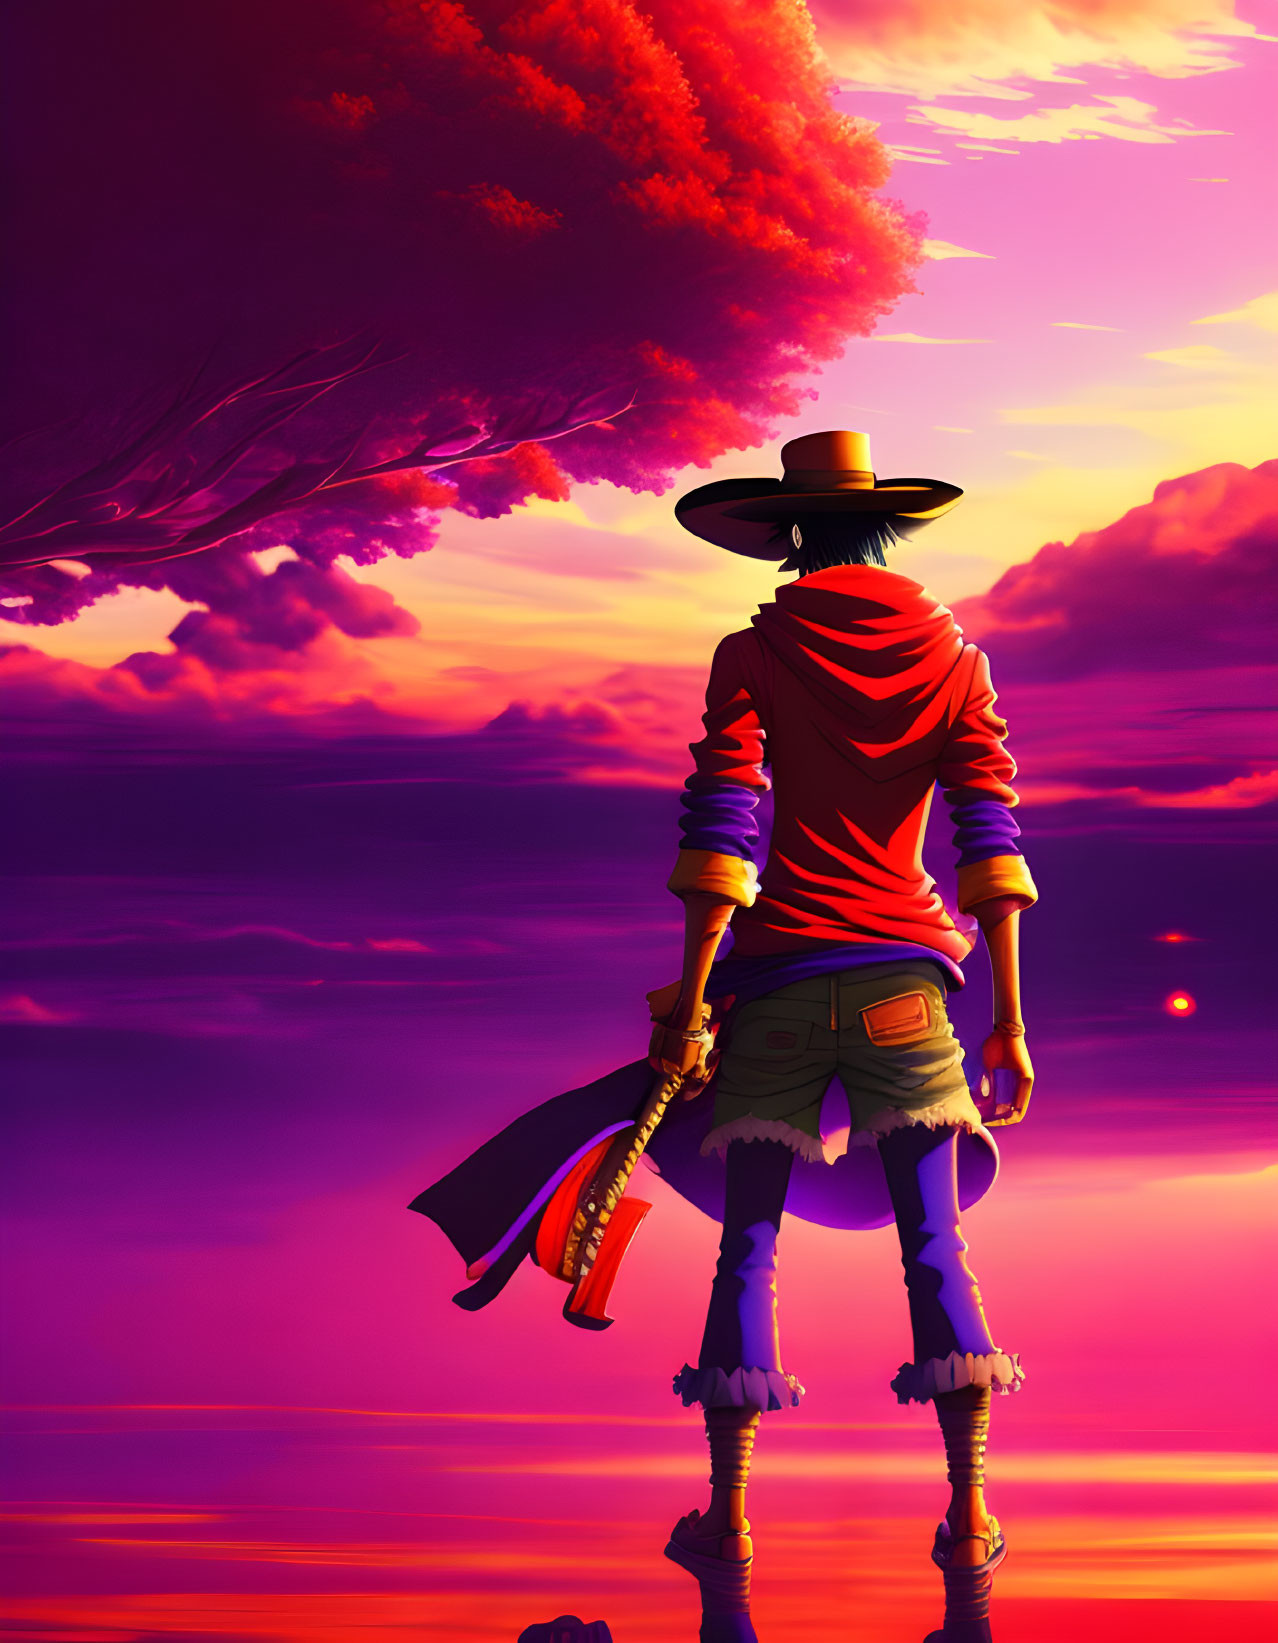 Character in Straw Hat and Red Attire Contemplates Sunset with Sword by Water